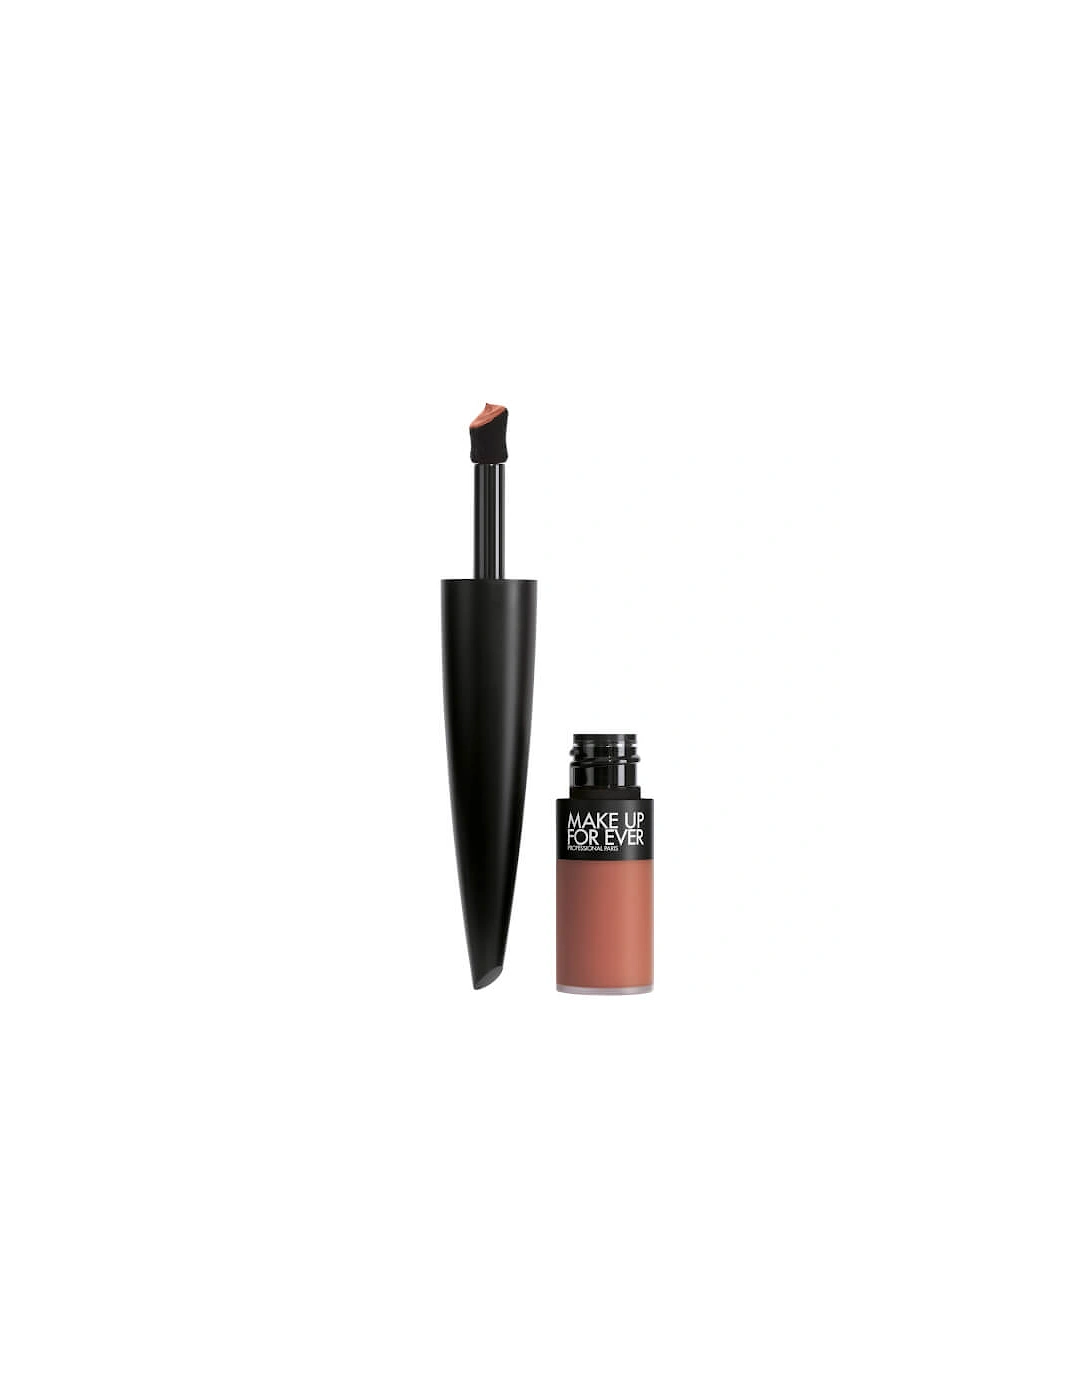 Rouge Artist For Ever Matte Lipstick - Toffee At All Hours, 2 of 1